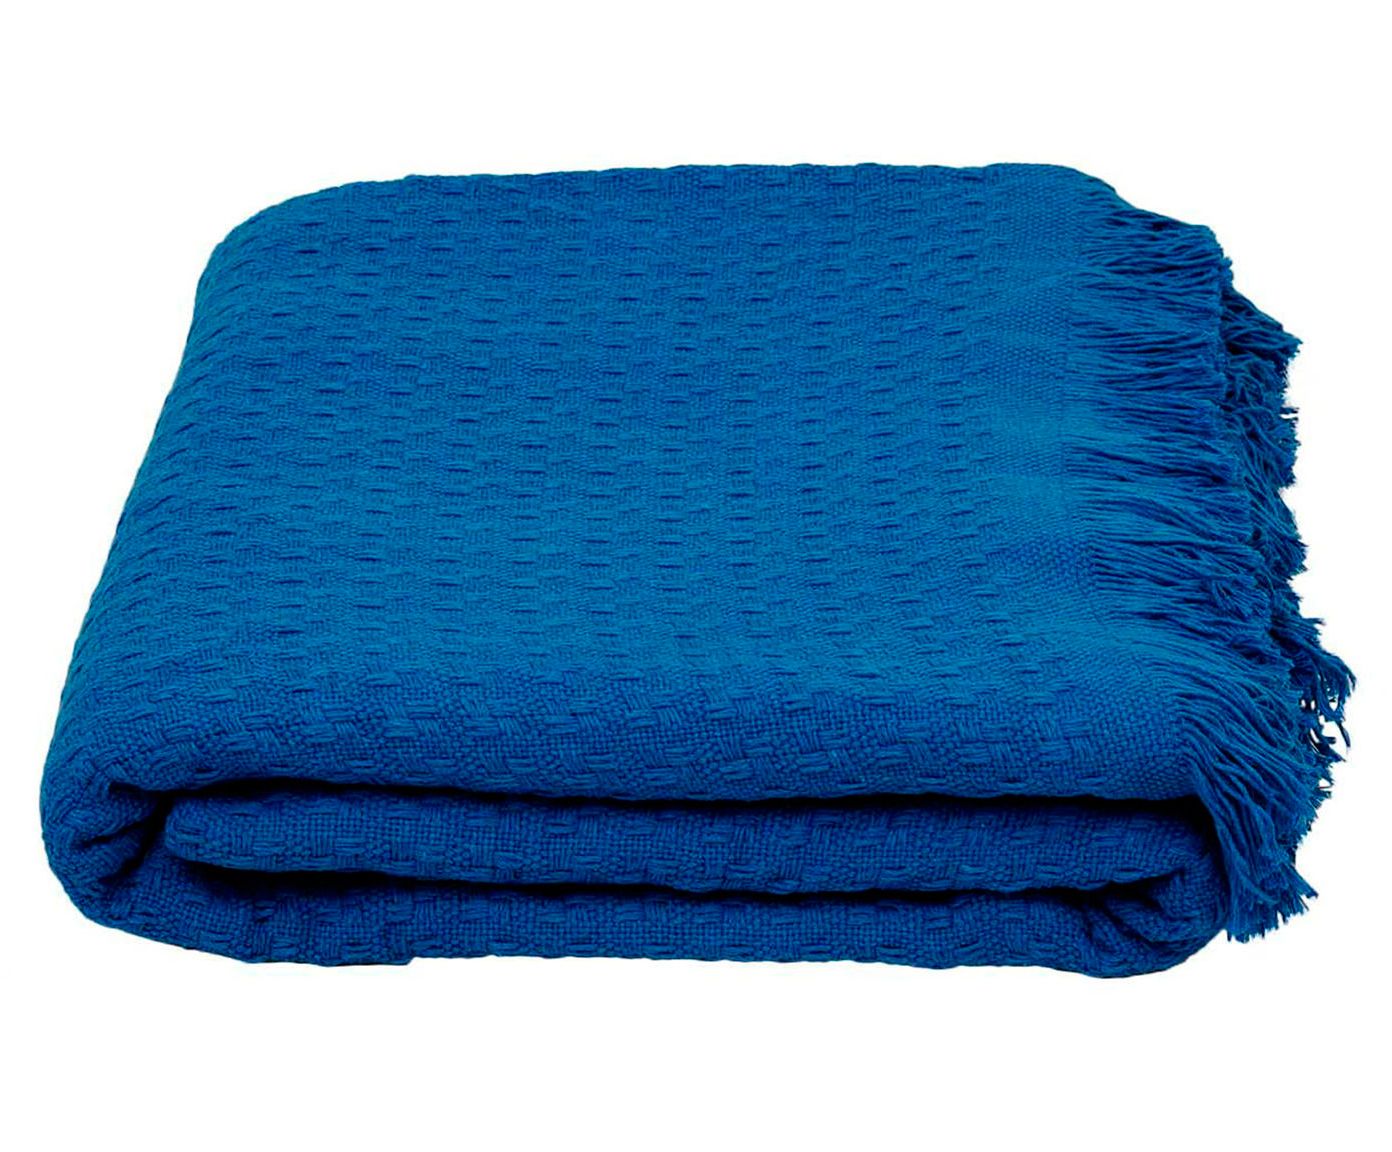 COLCHA ETERNA AZUL ROYAL - QUEEN SIZE | Westwing.com.br